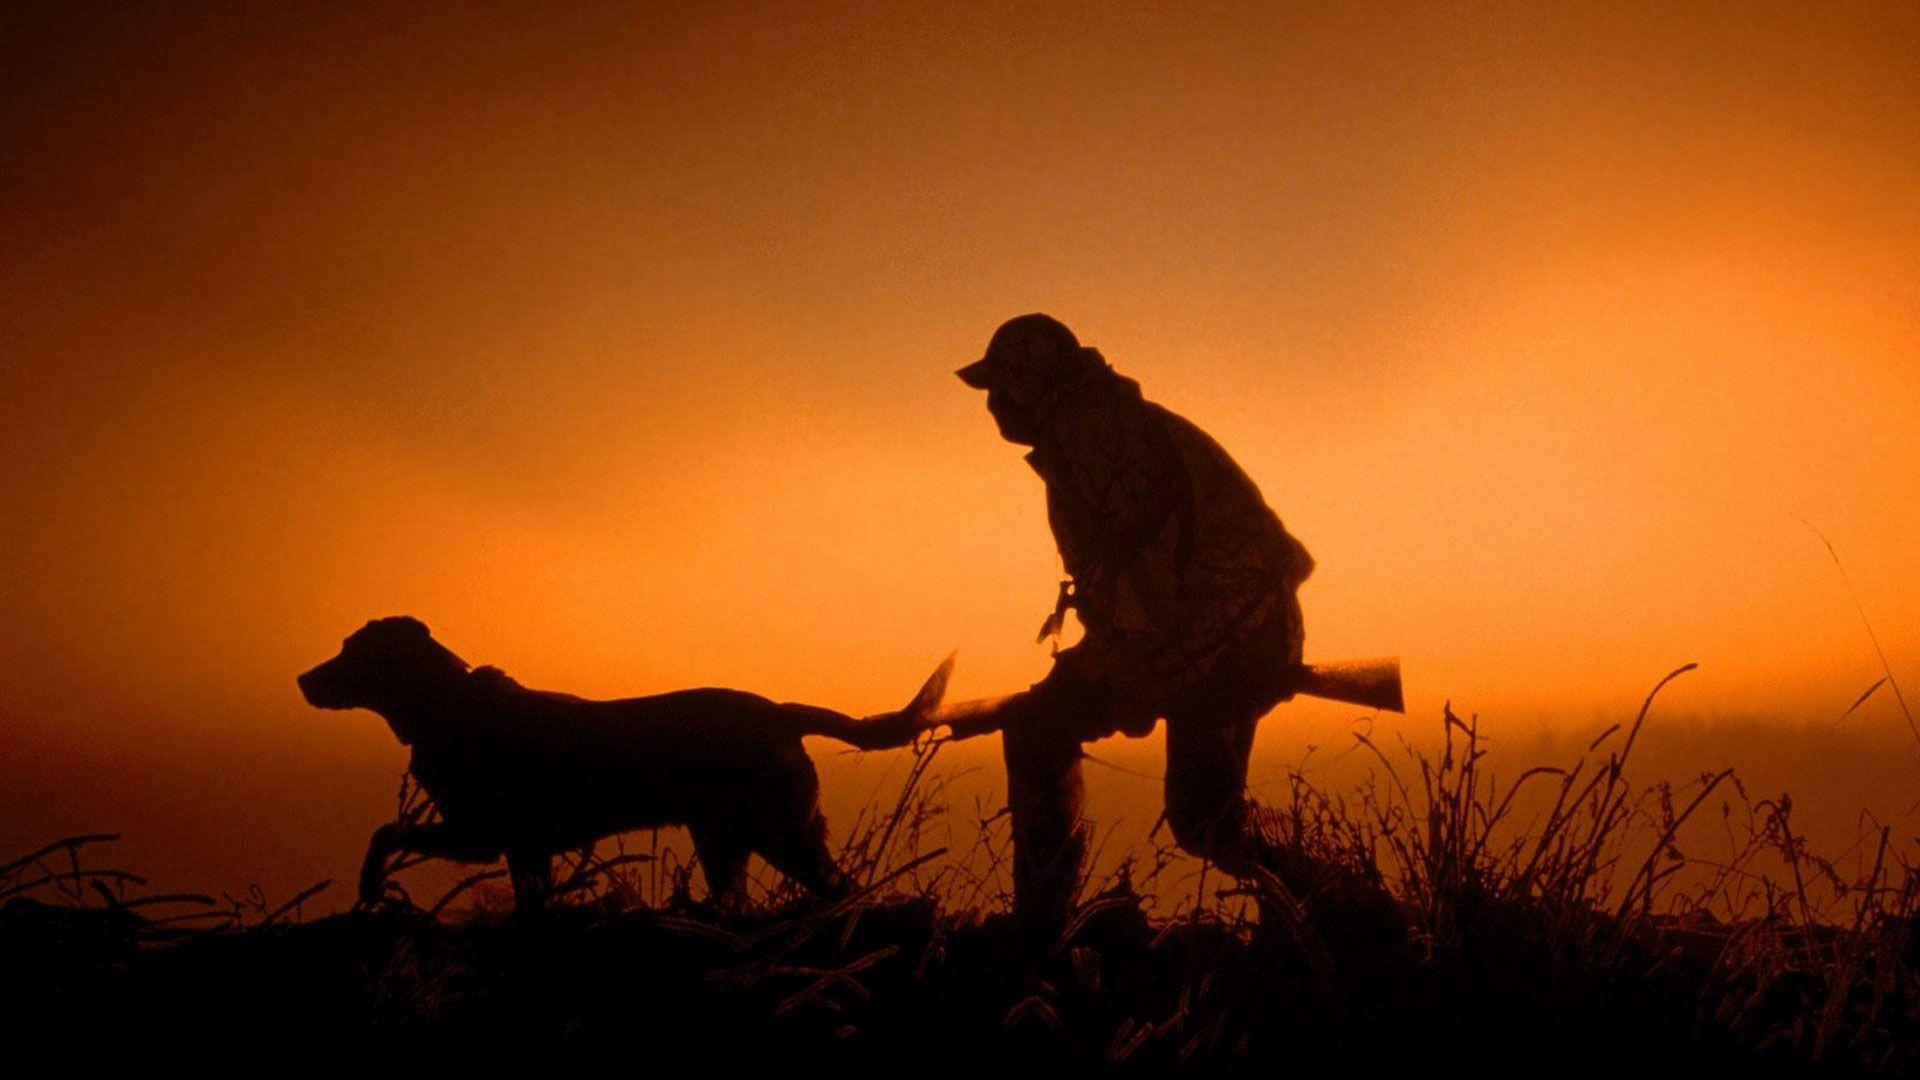 ATTRACTIVE HUNTING WITH DOG GUN MAN HD QUALITY DESKTOP BACKGROUND